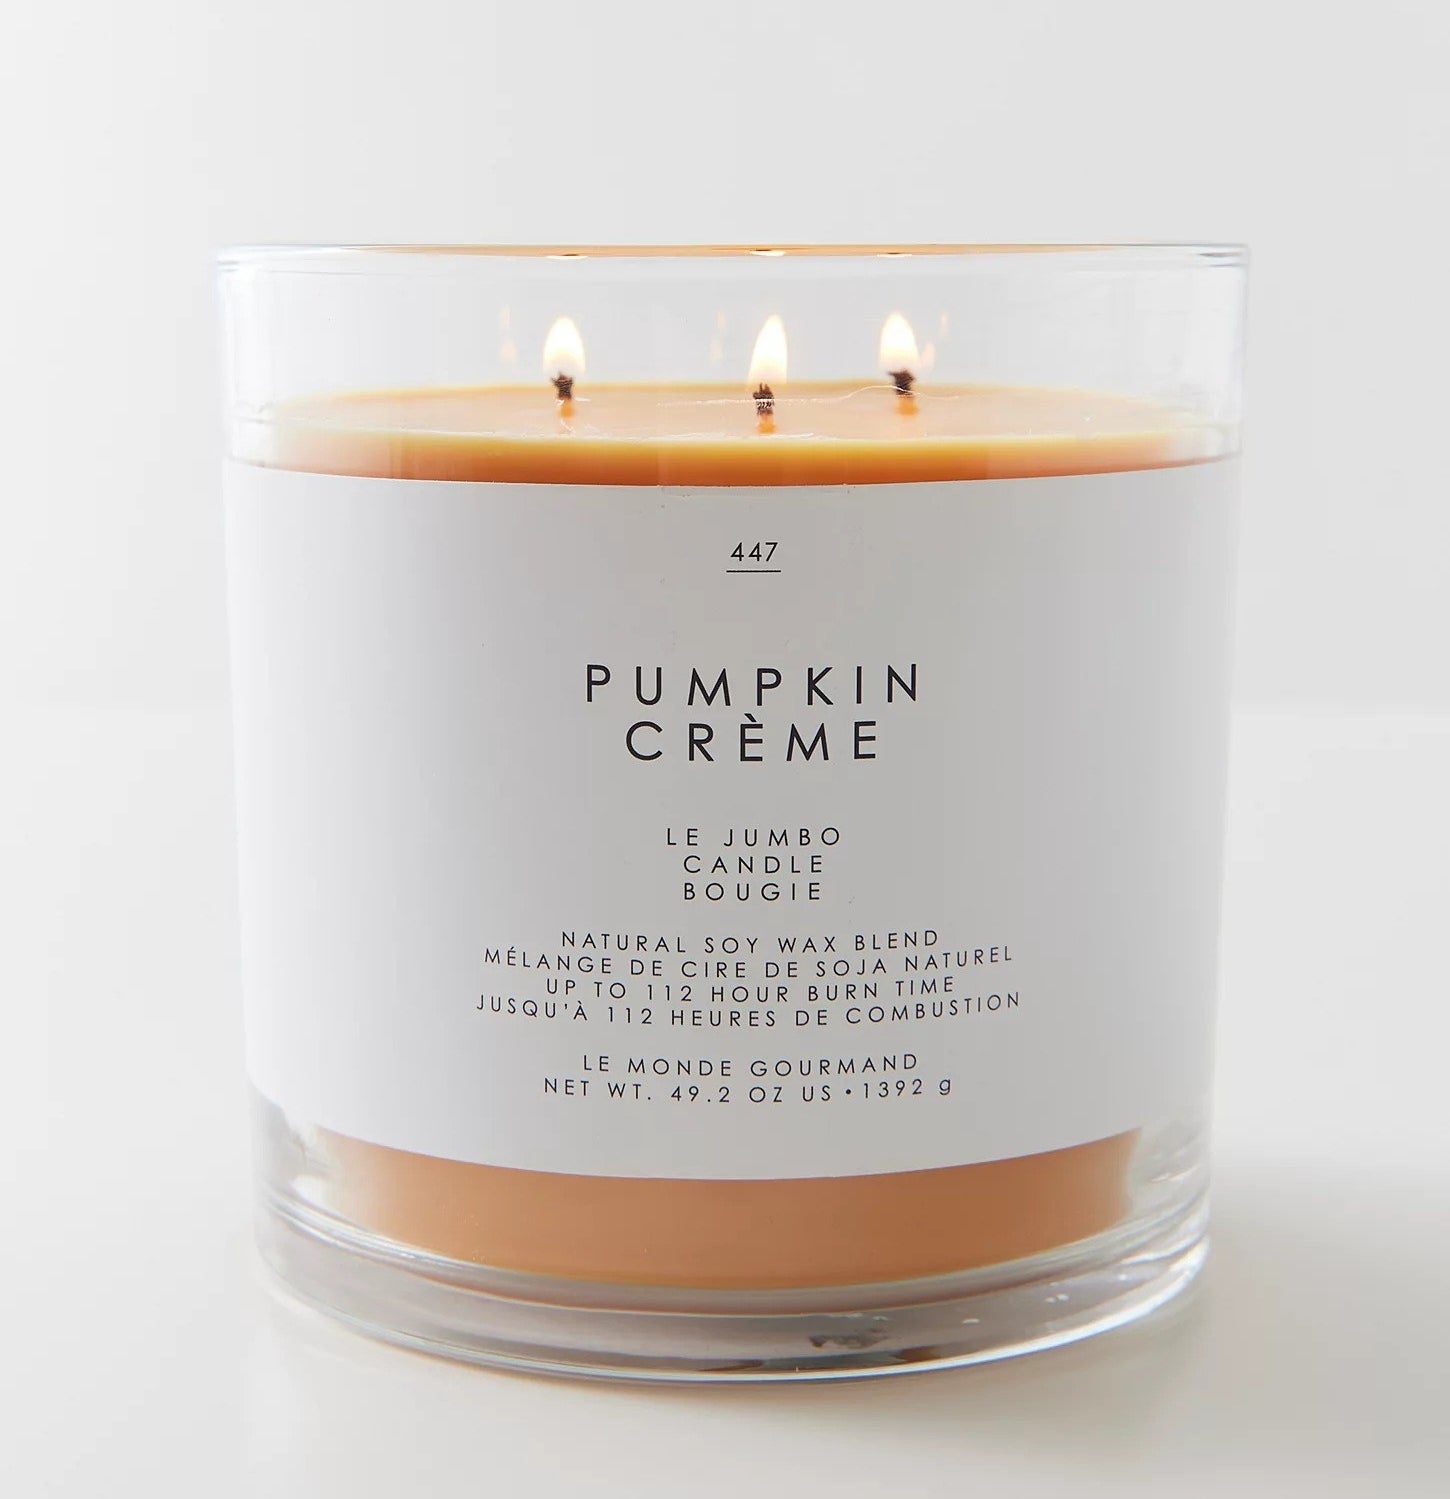 lit pumpkin creme-scented candle